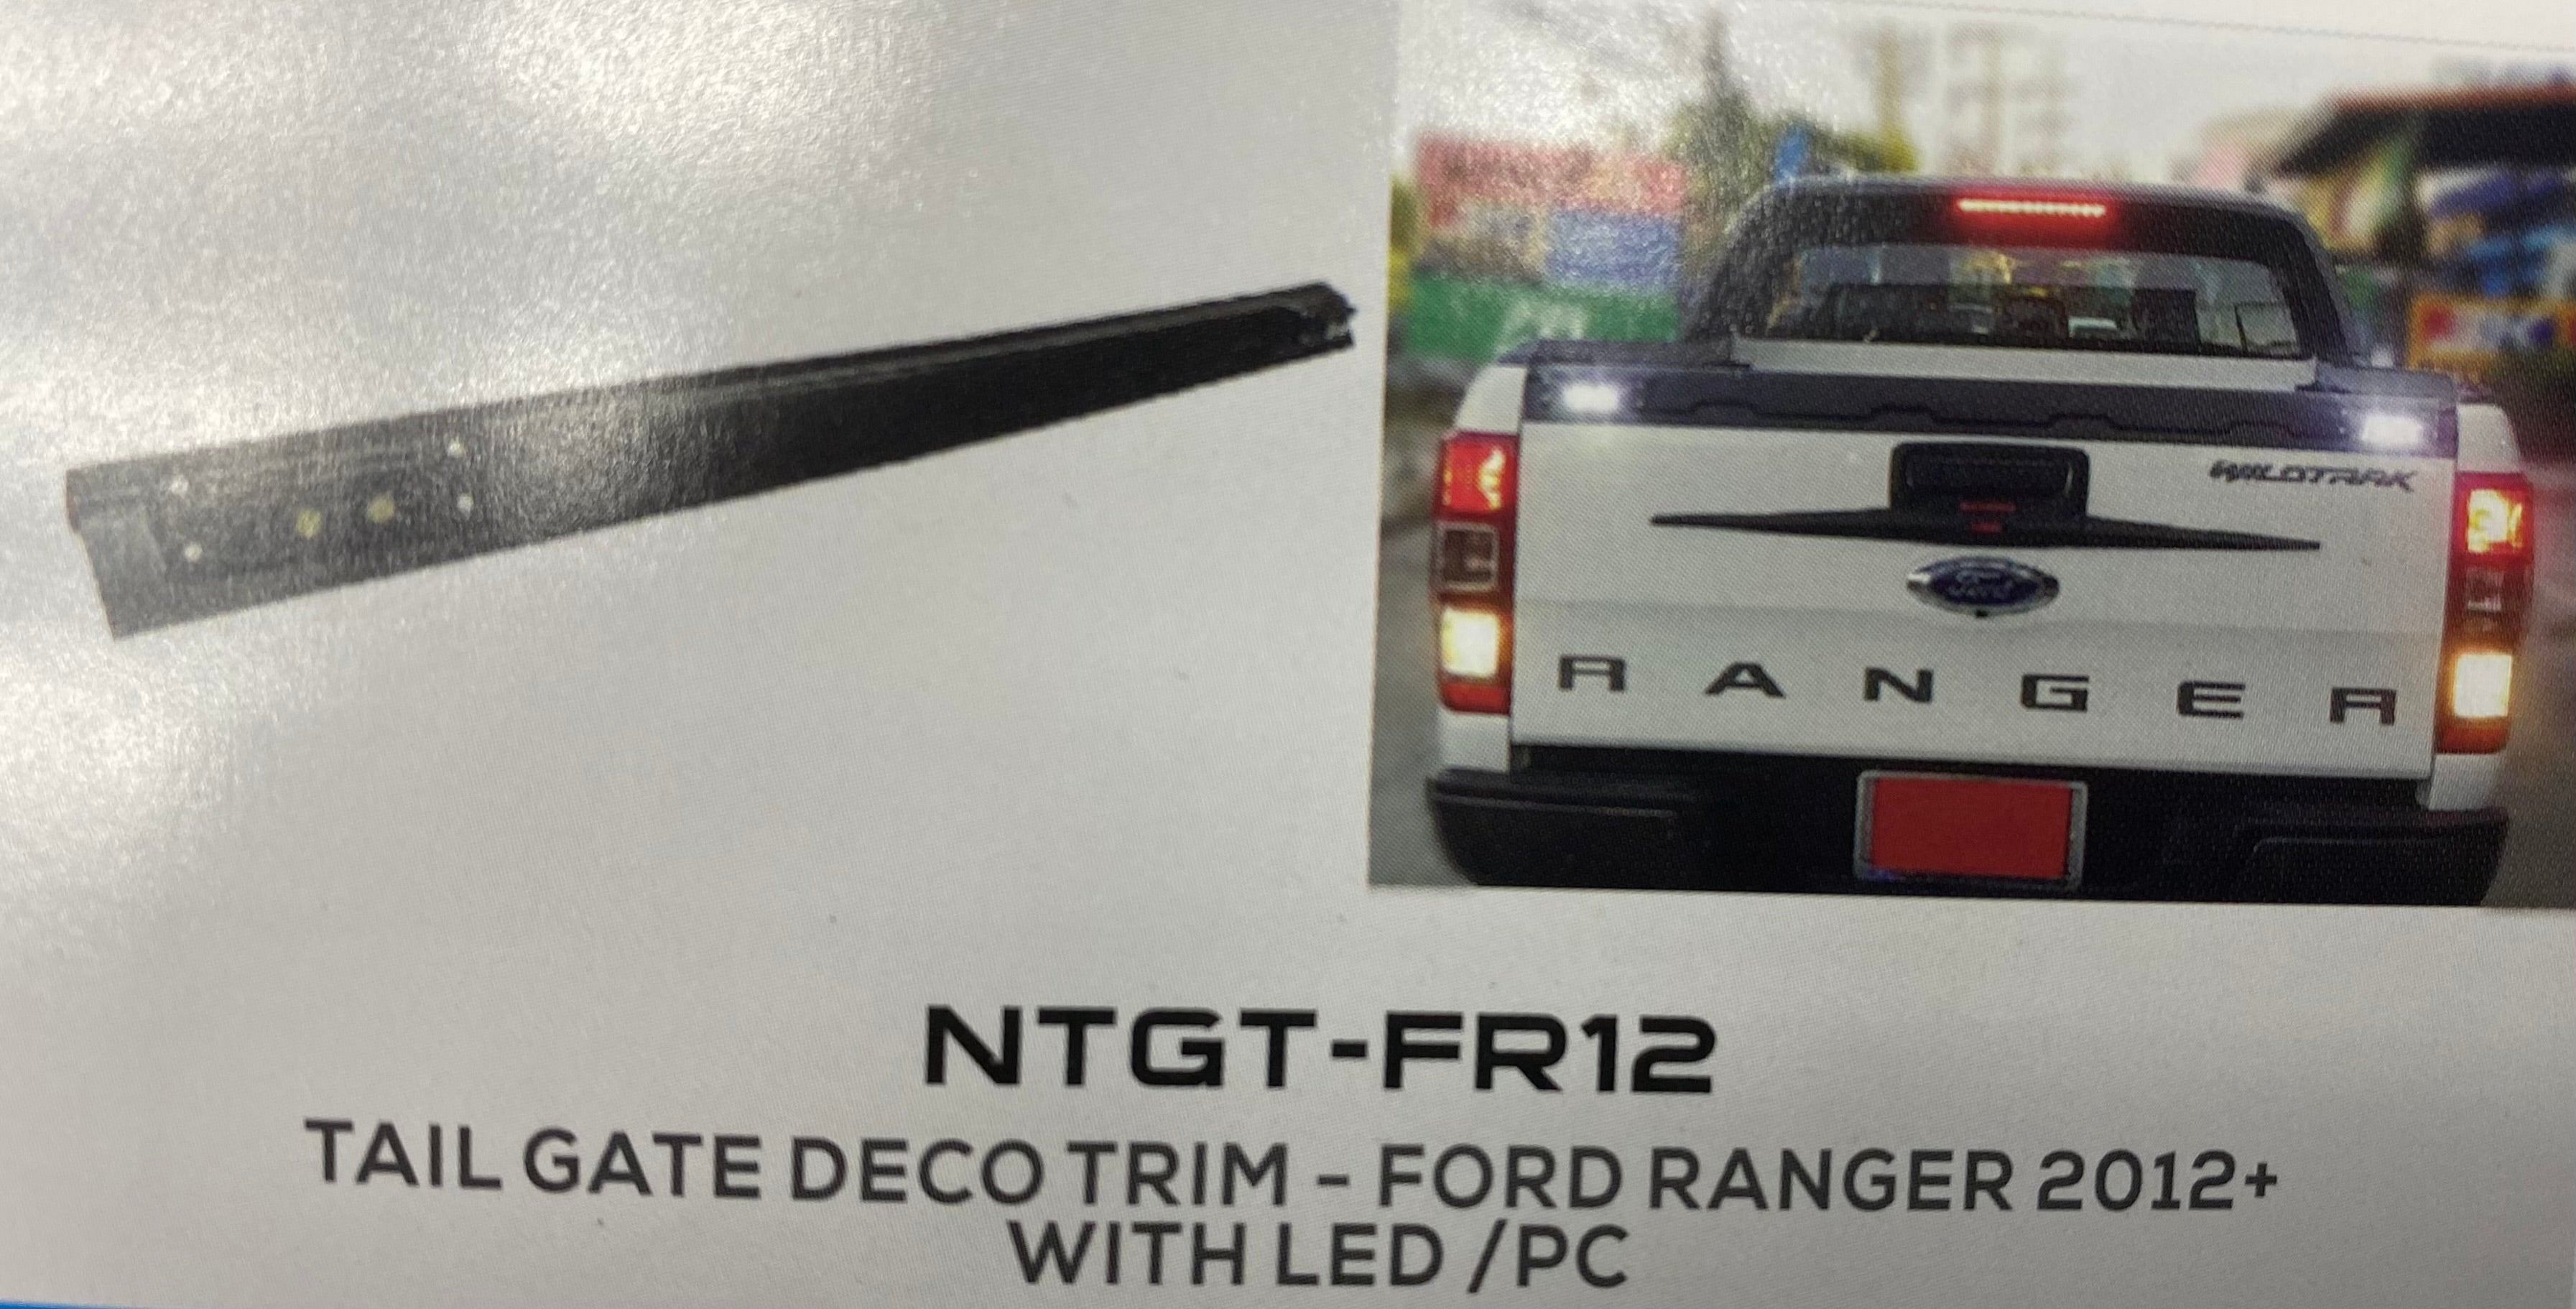 Ford ranger tailgate spoiler with 4xled